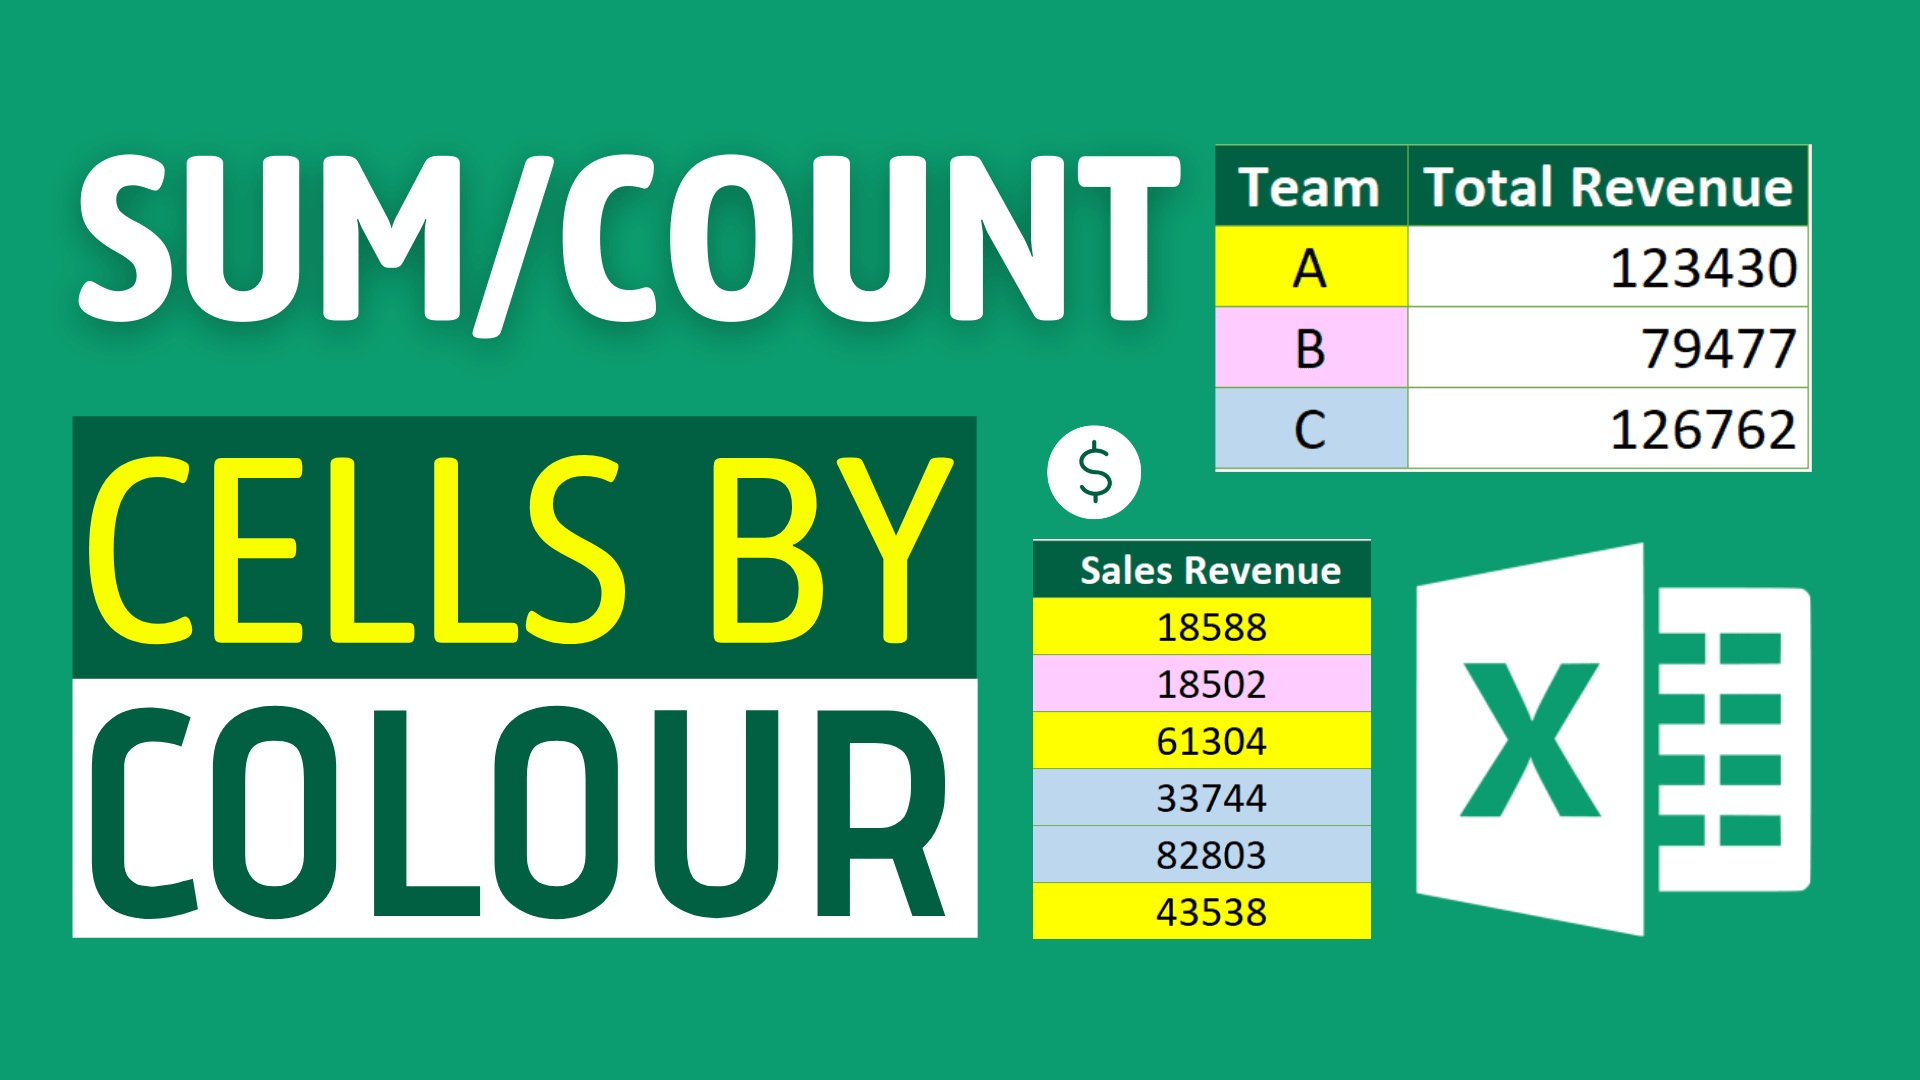 how-to-sum-and-count-cells-by-color-in-excel-dollar-excel